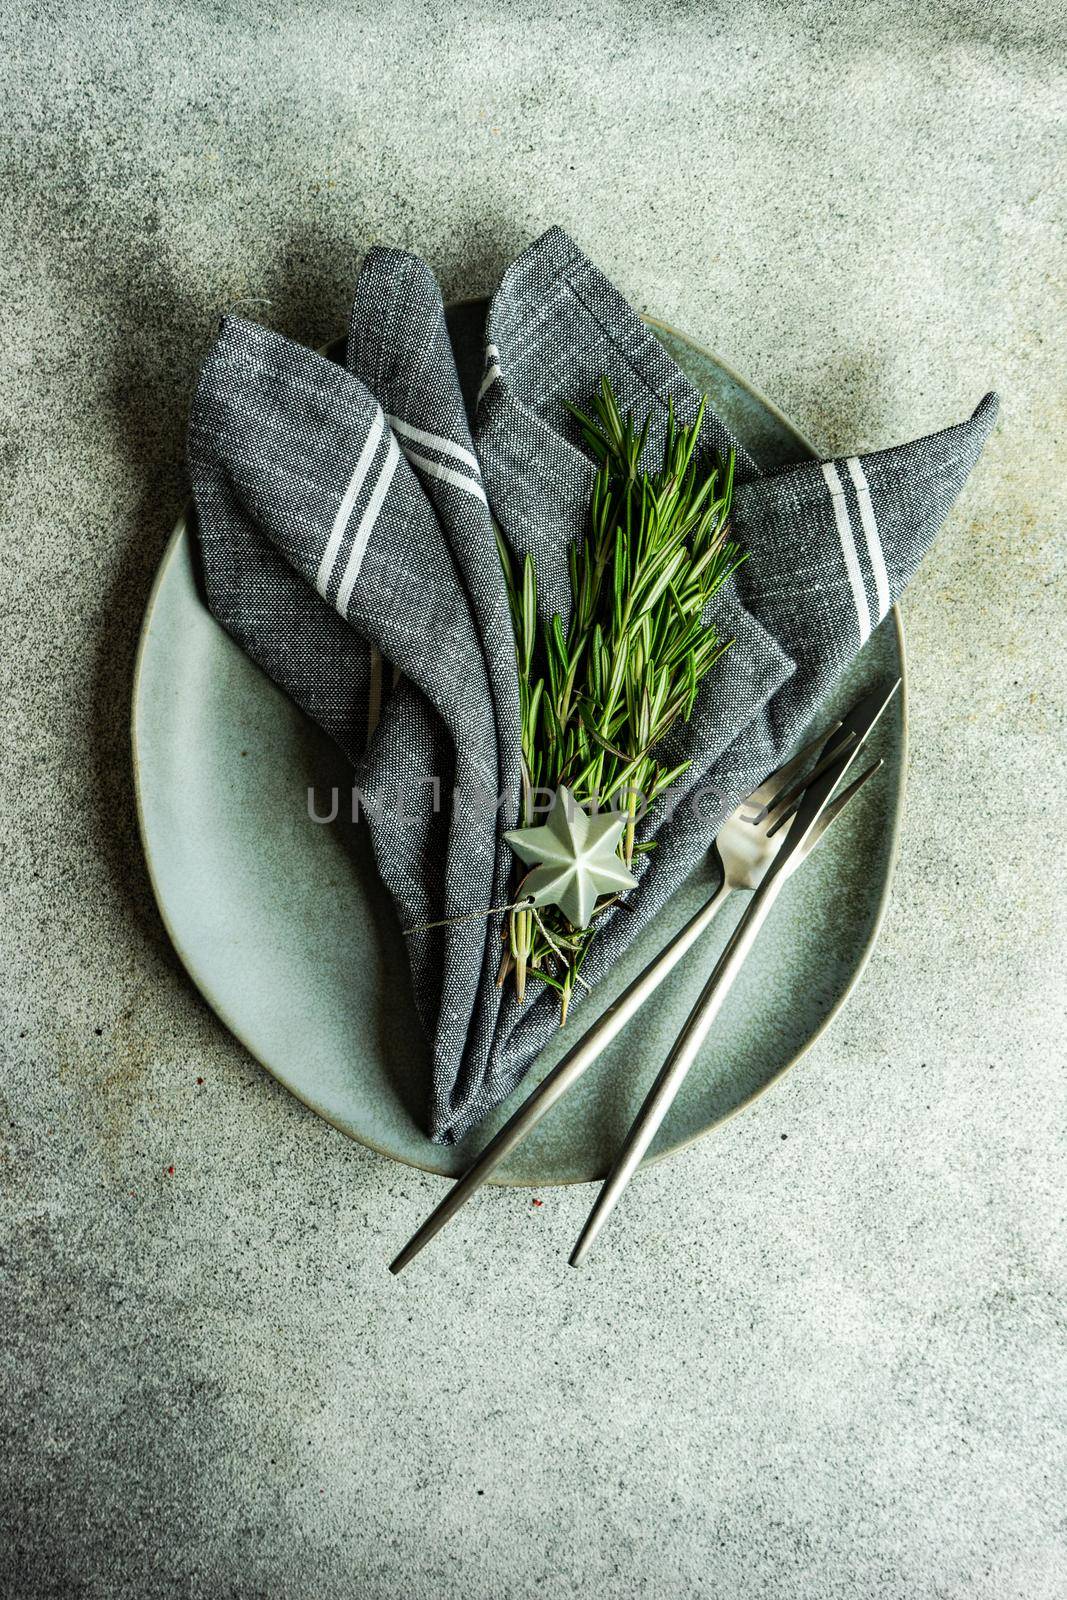 Table setting with fresh rosemary by Elet